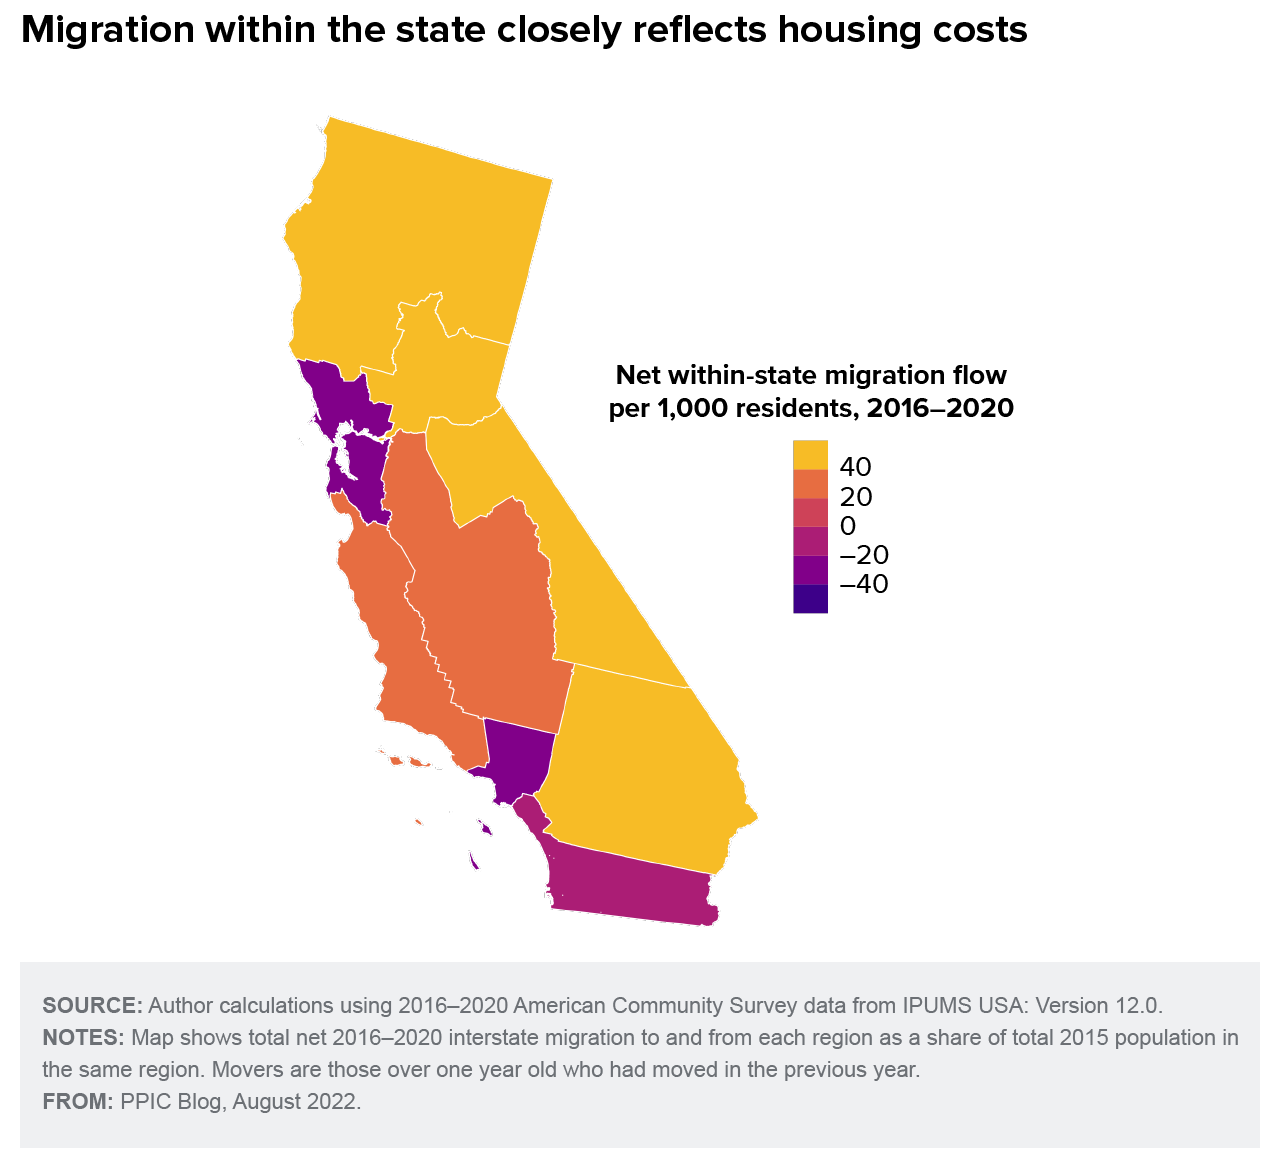 figure - Migration within the state closely reflects housing costs